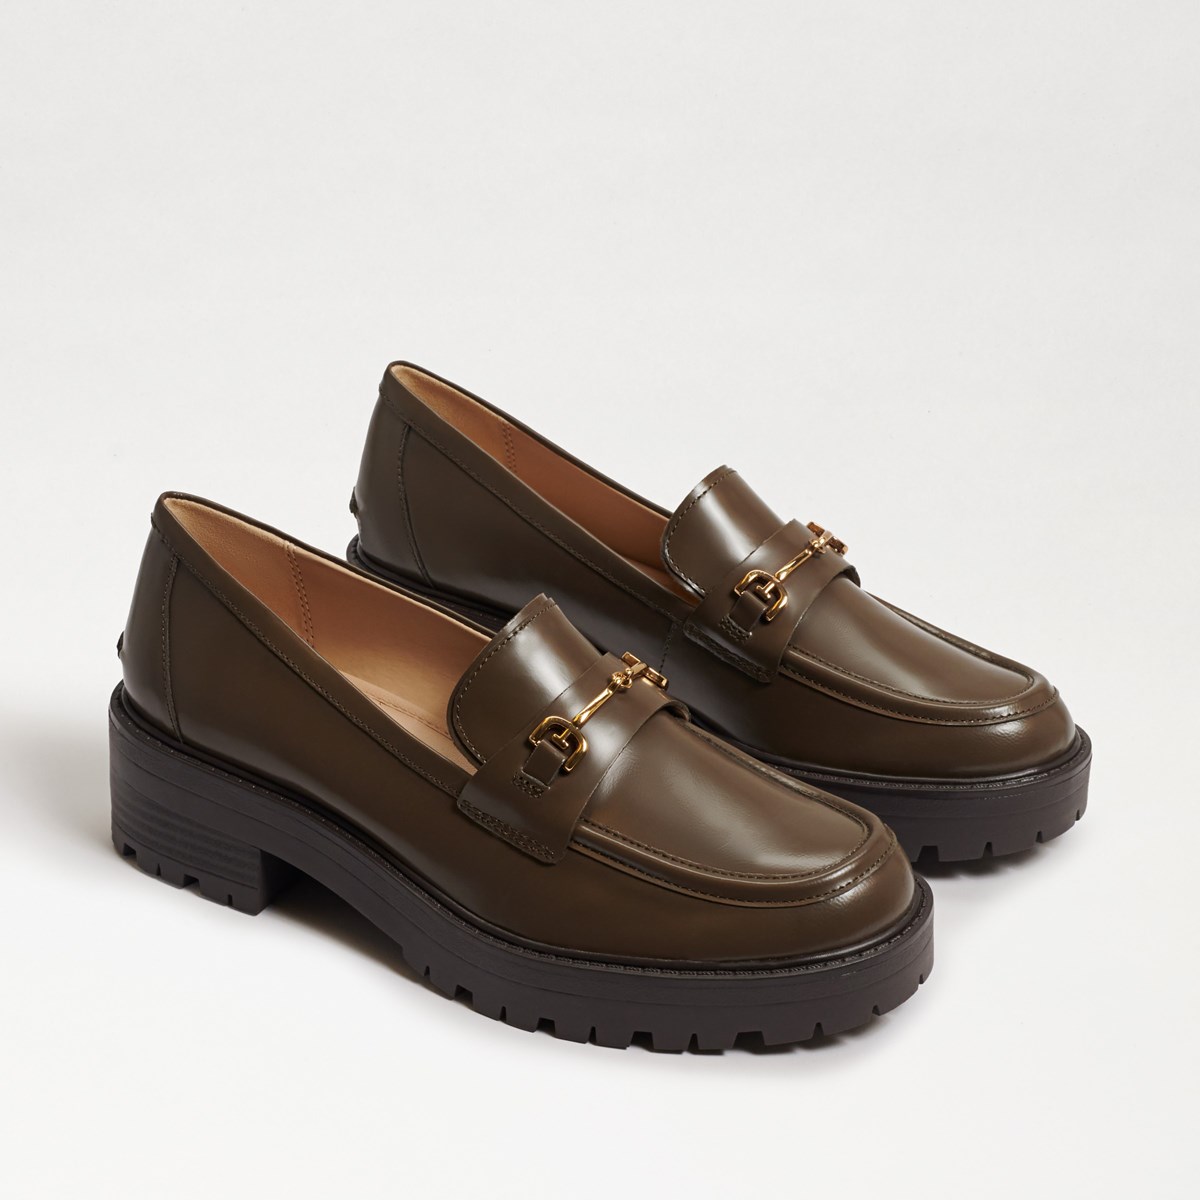 Tully Lug Sole Loafer - Pair